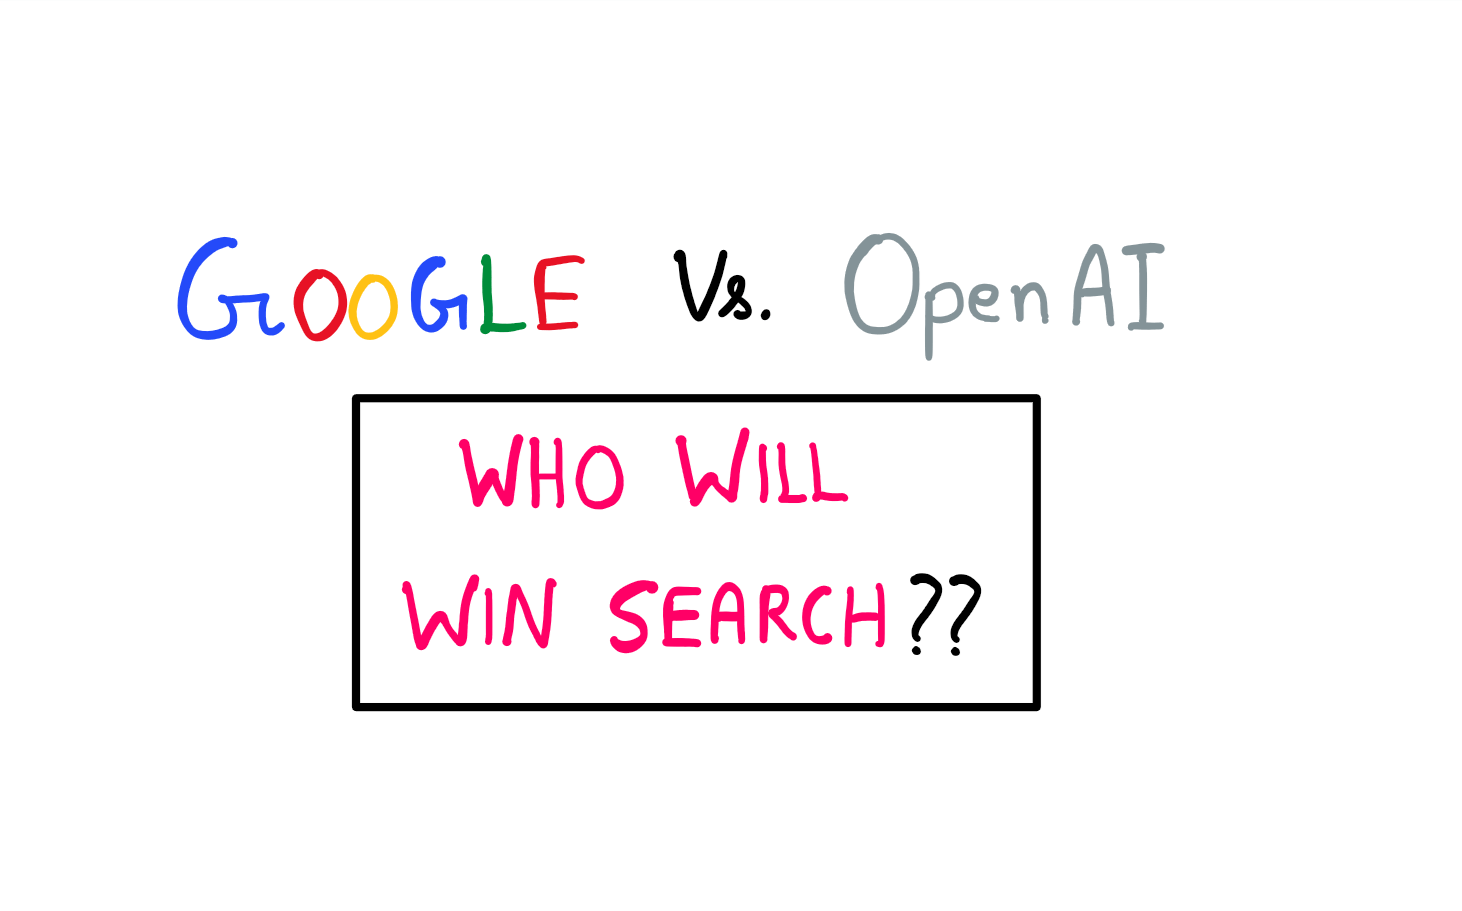 The Billion Dollar Question For Programmers Out There - Who will win web search? - An illustration showing Google Vs. OpenAI. Below this battle card, the following card is written: "Who will win search?"